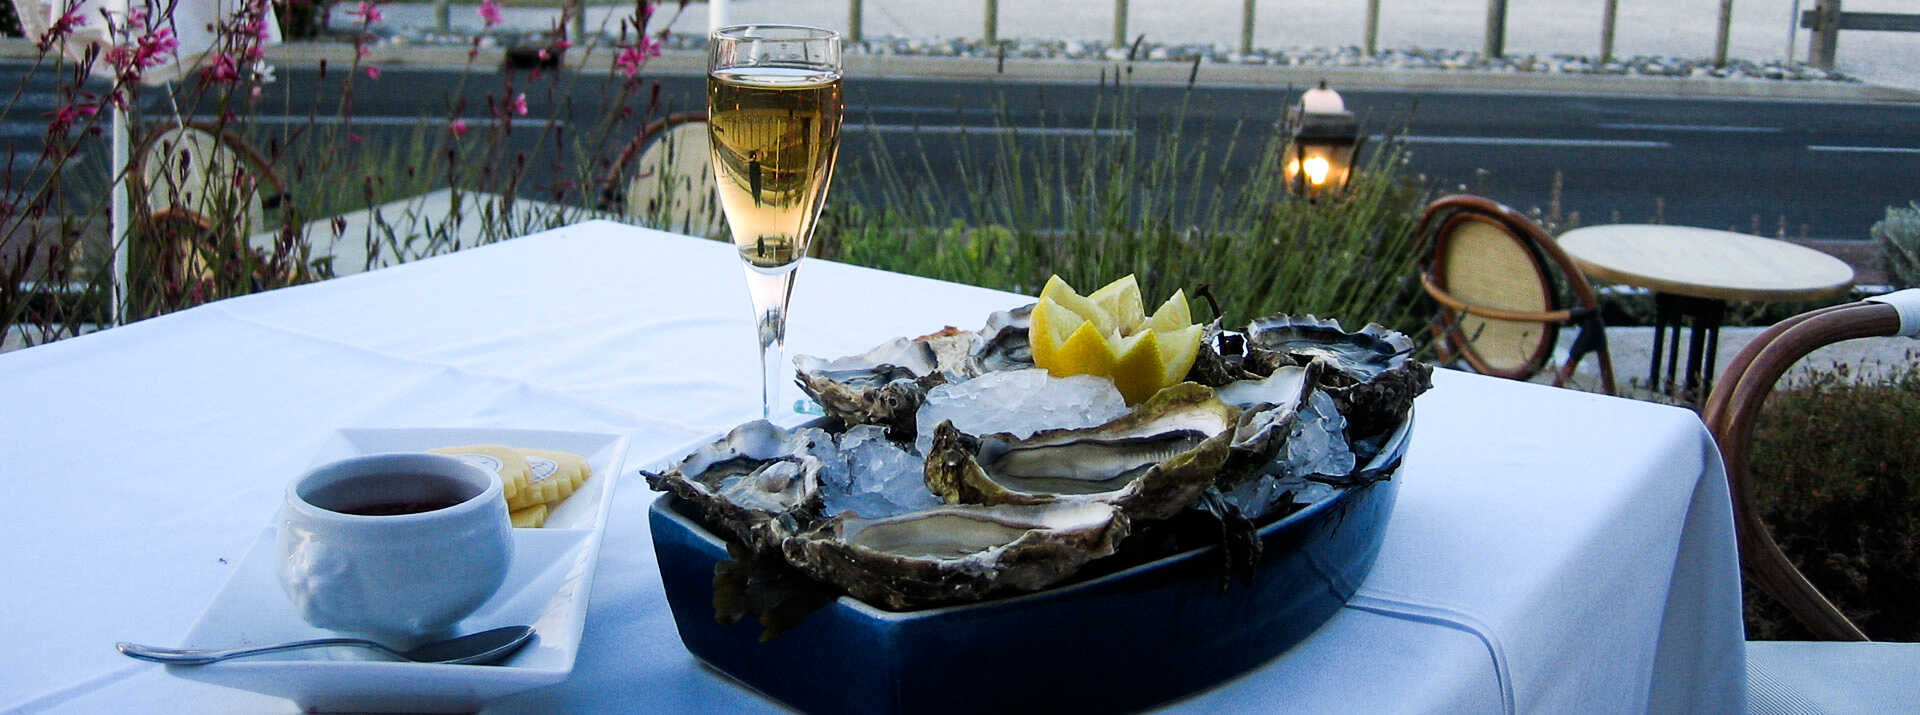 Marennes-Oléron oysters, the great speciality of the island of Oléron